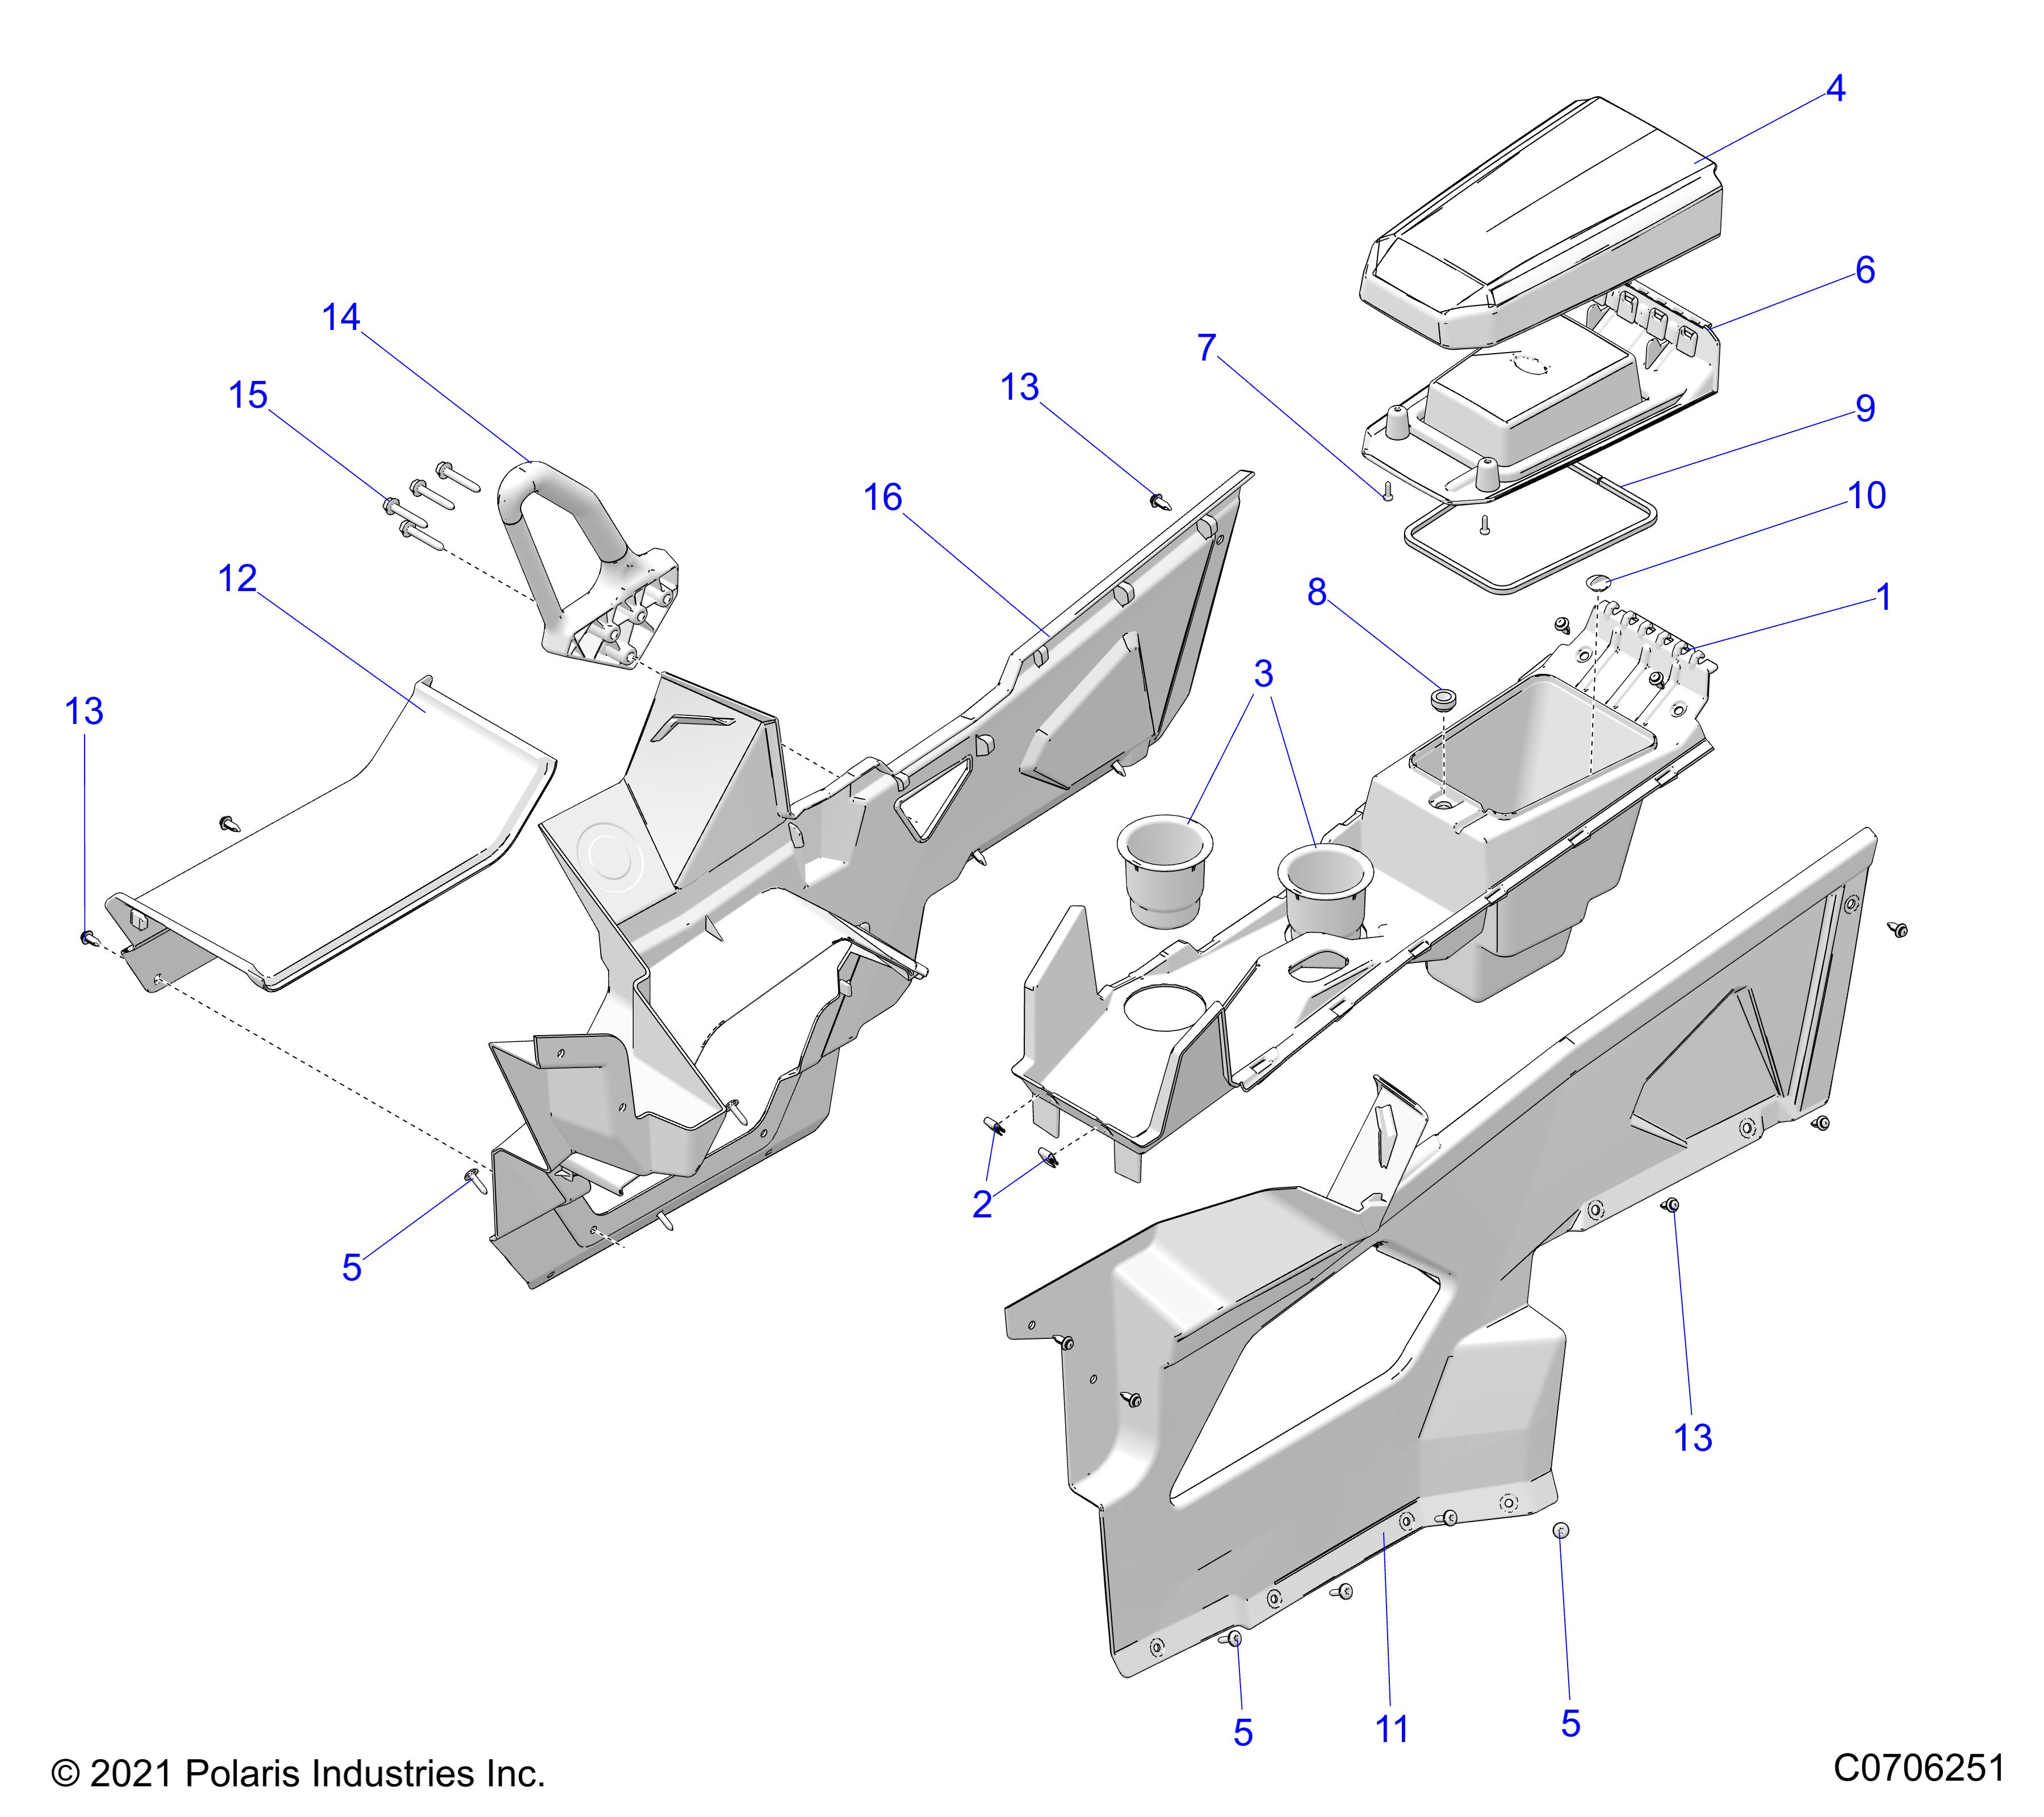 Part Number : 2207139 CENTER CONSOLE KIT  TOP